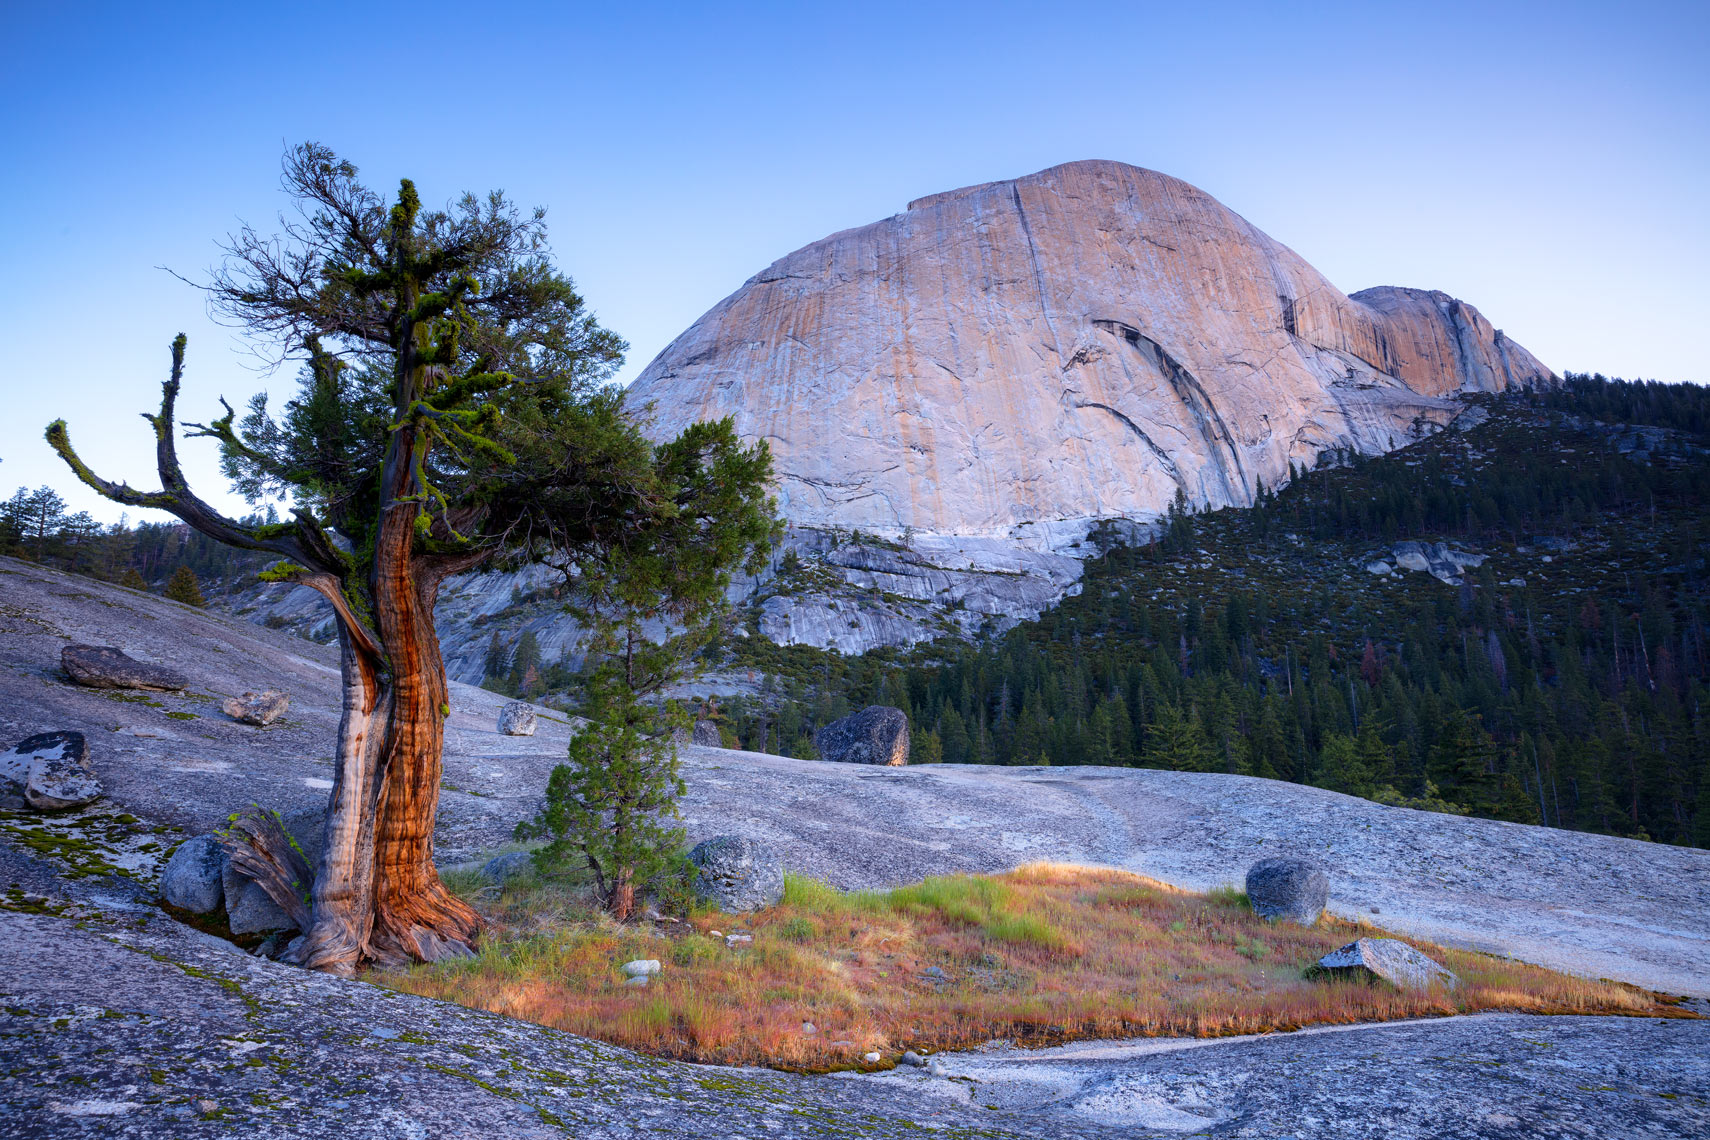 Yosemite-First-Light-Behind-The-Dome-I6A8367-copy